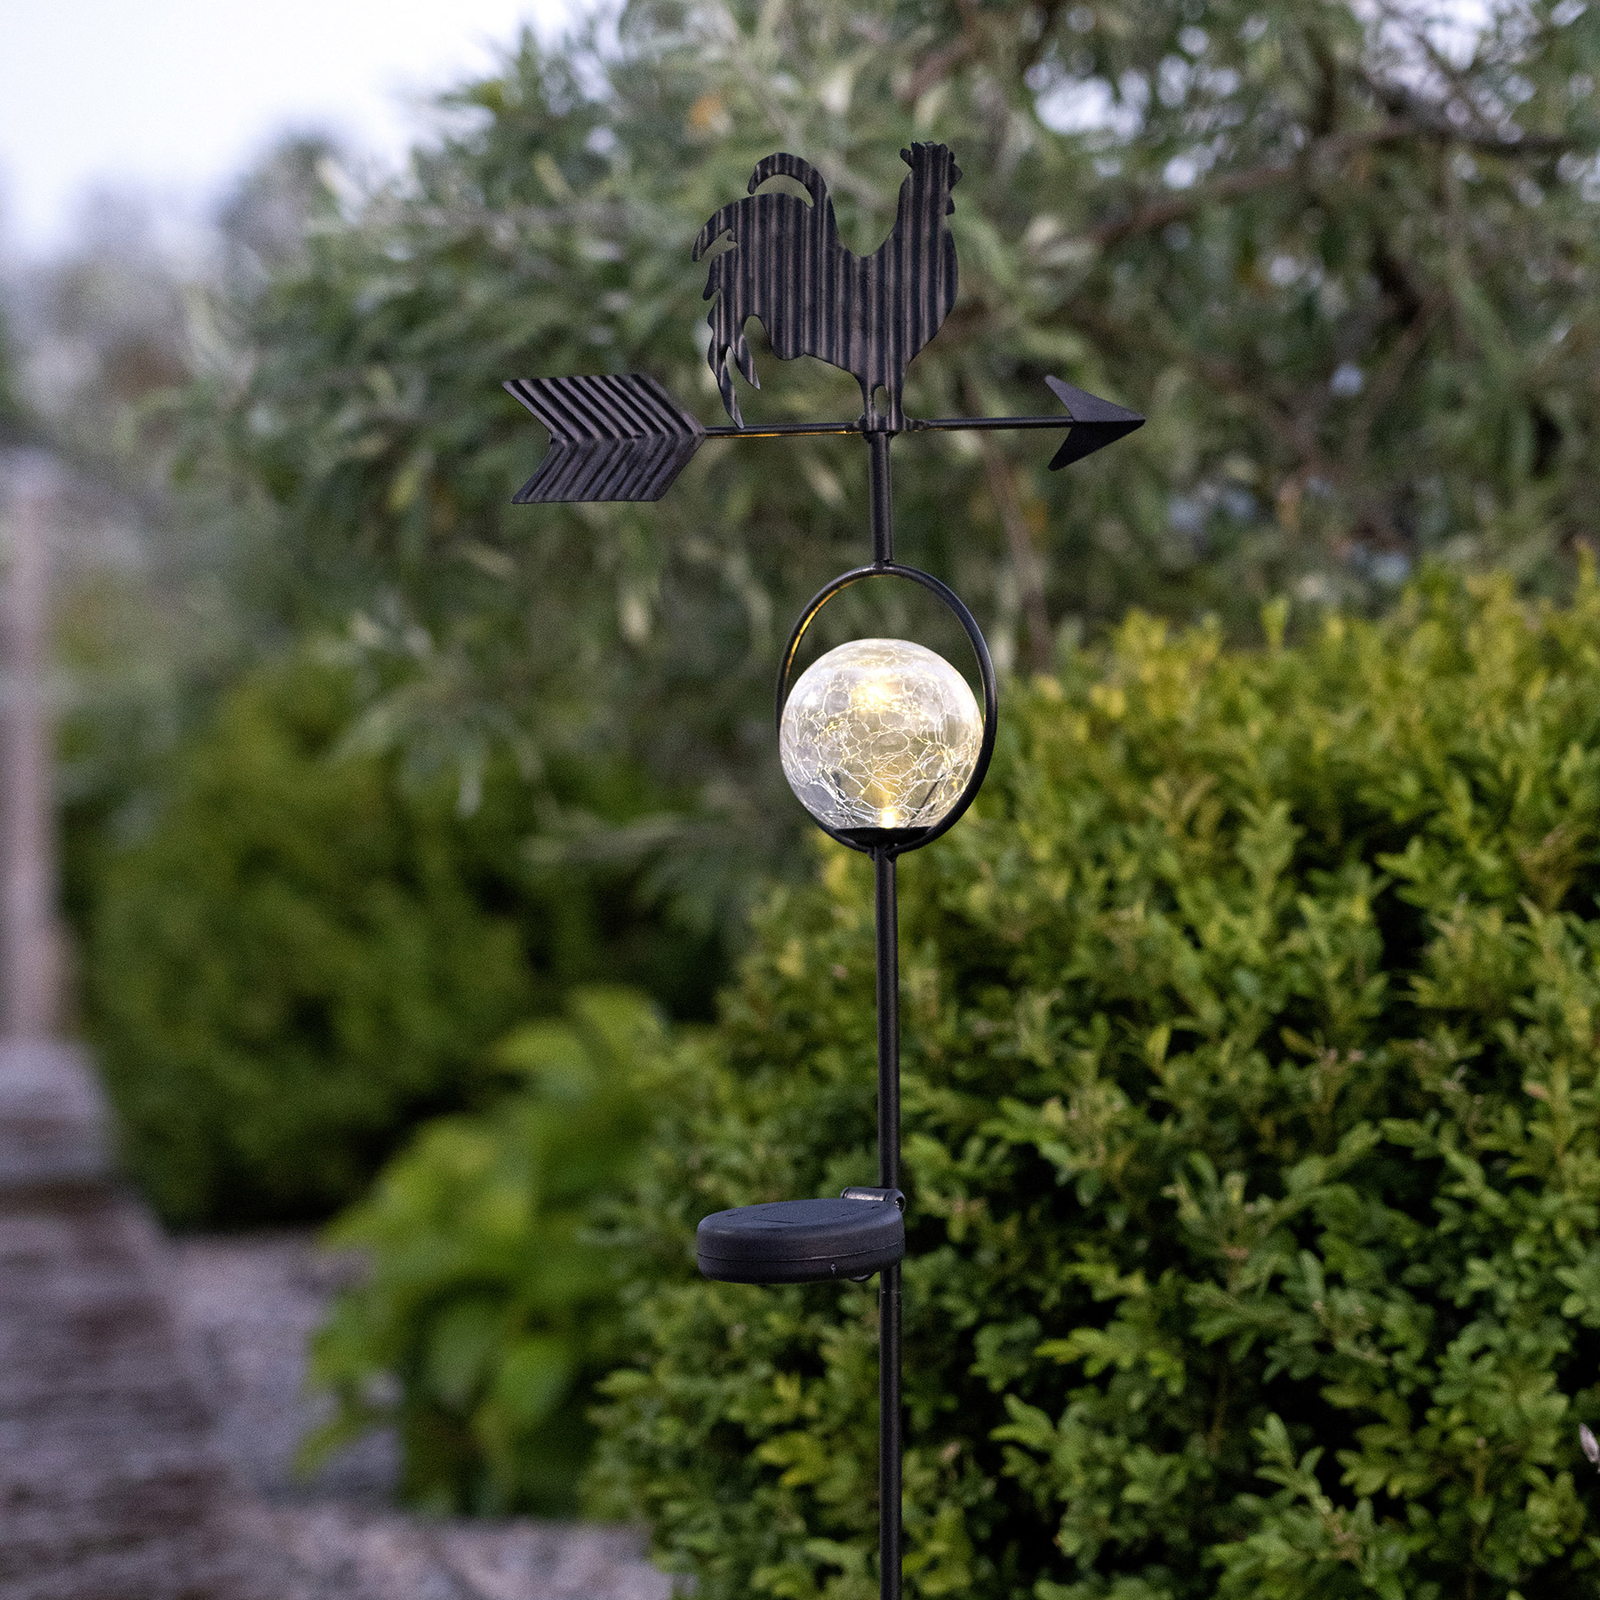 Windy LED solar light, shows the wind direction